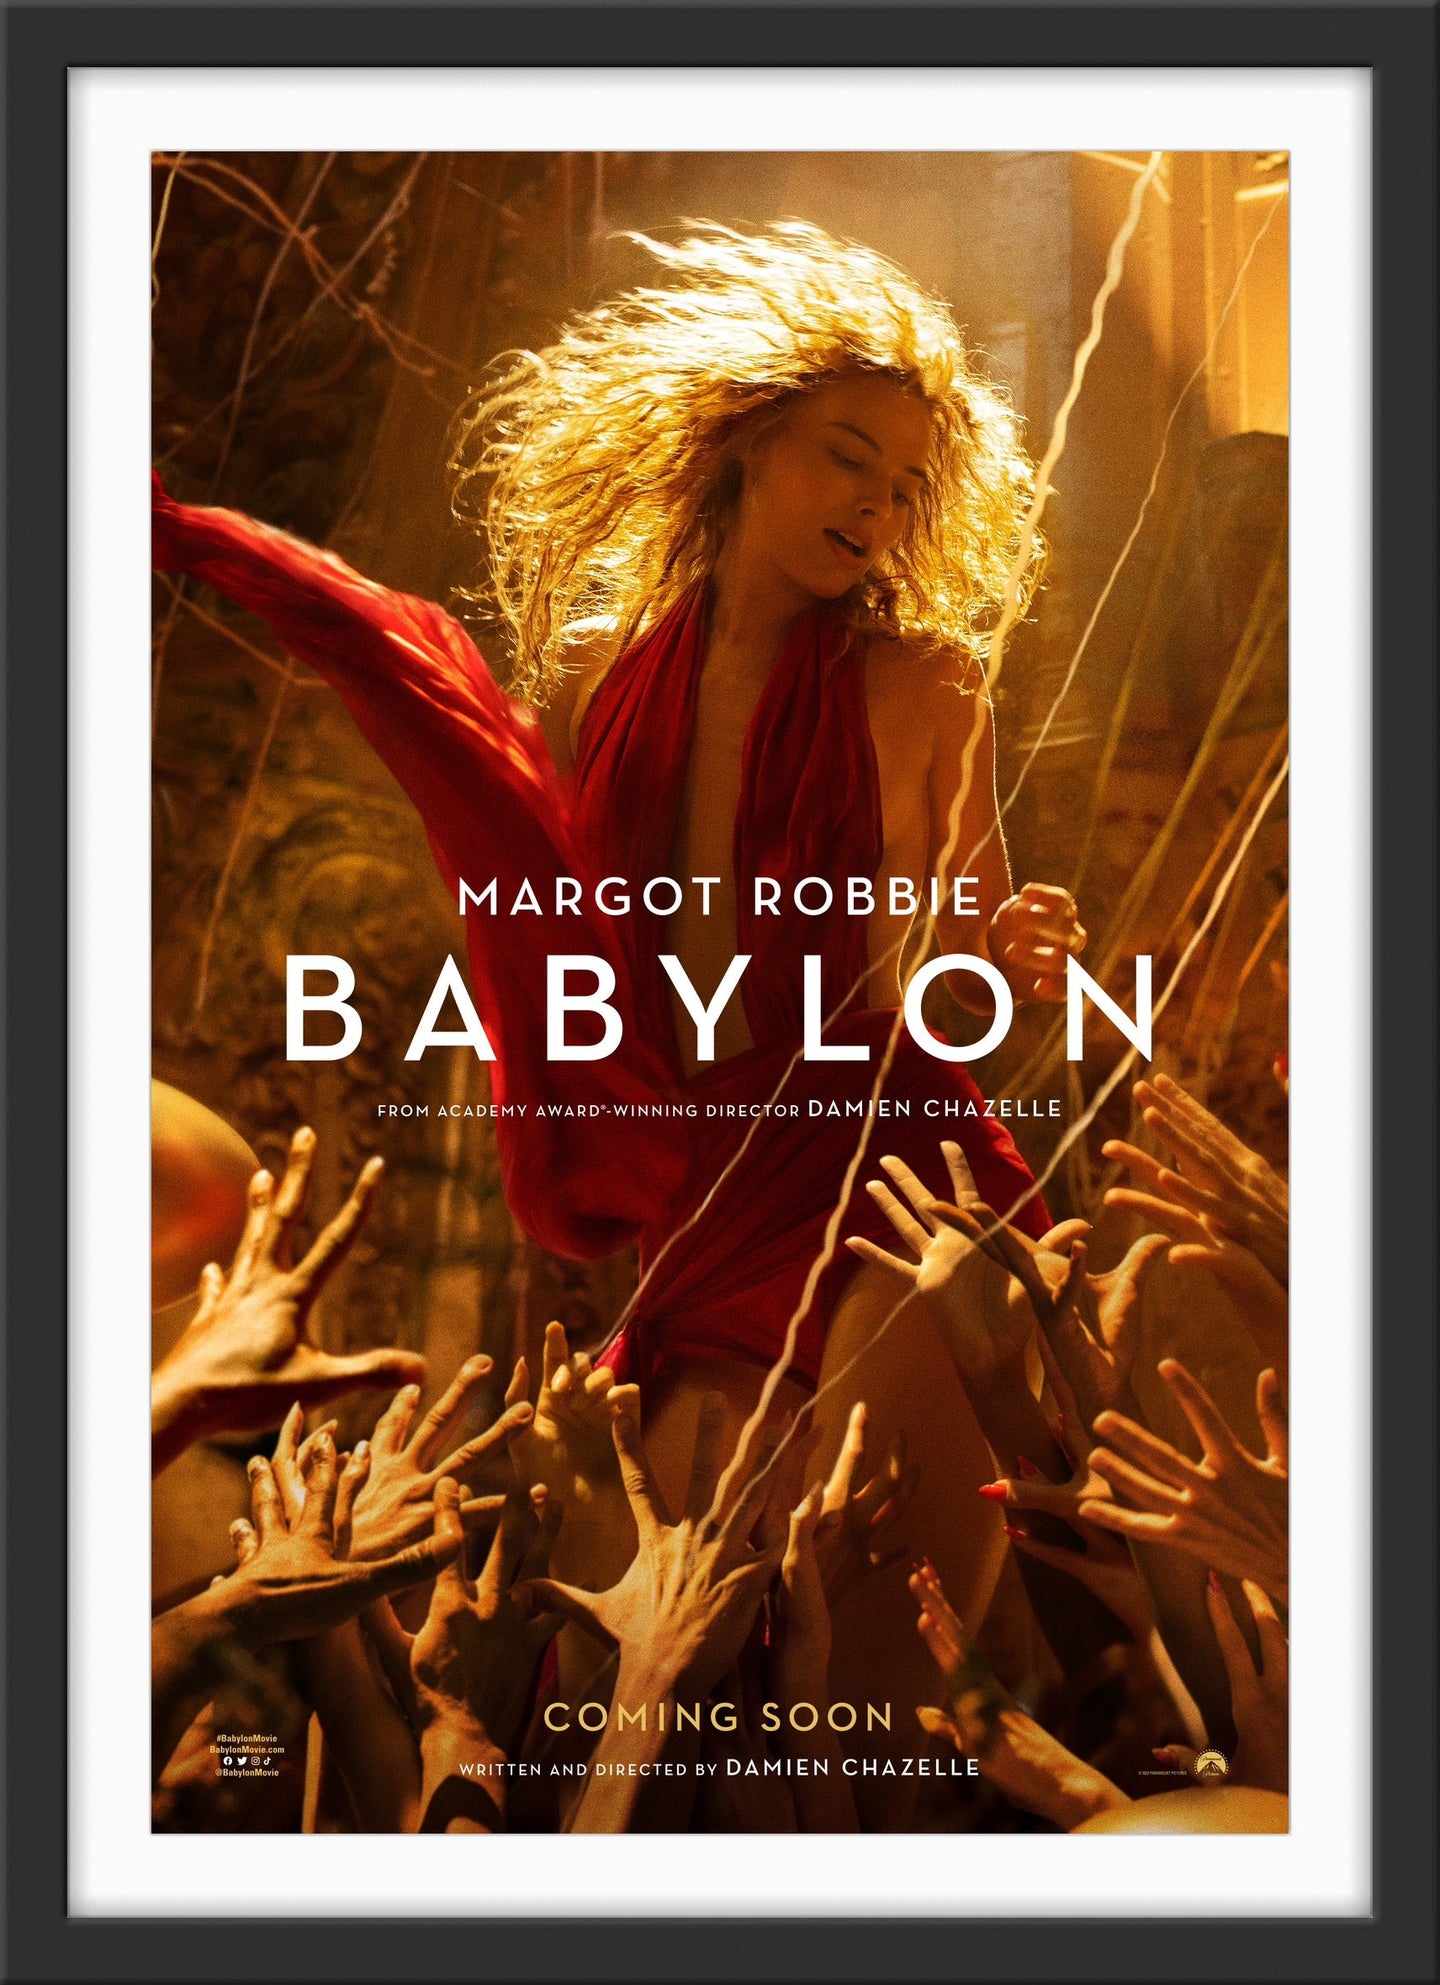 An original Margot Robbie character movie poster for the Damian Chazelle film Babylon